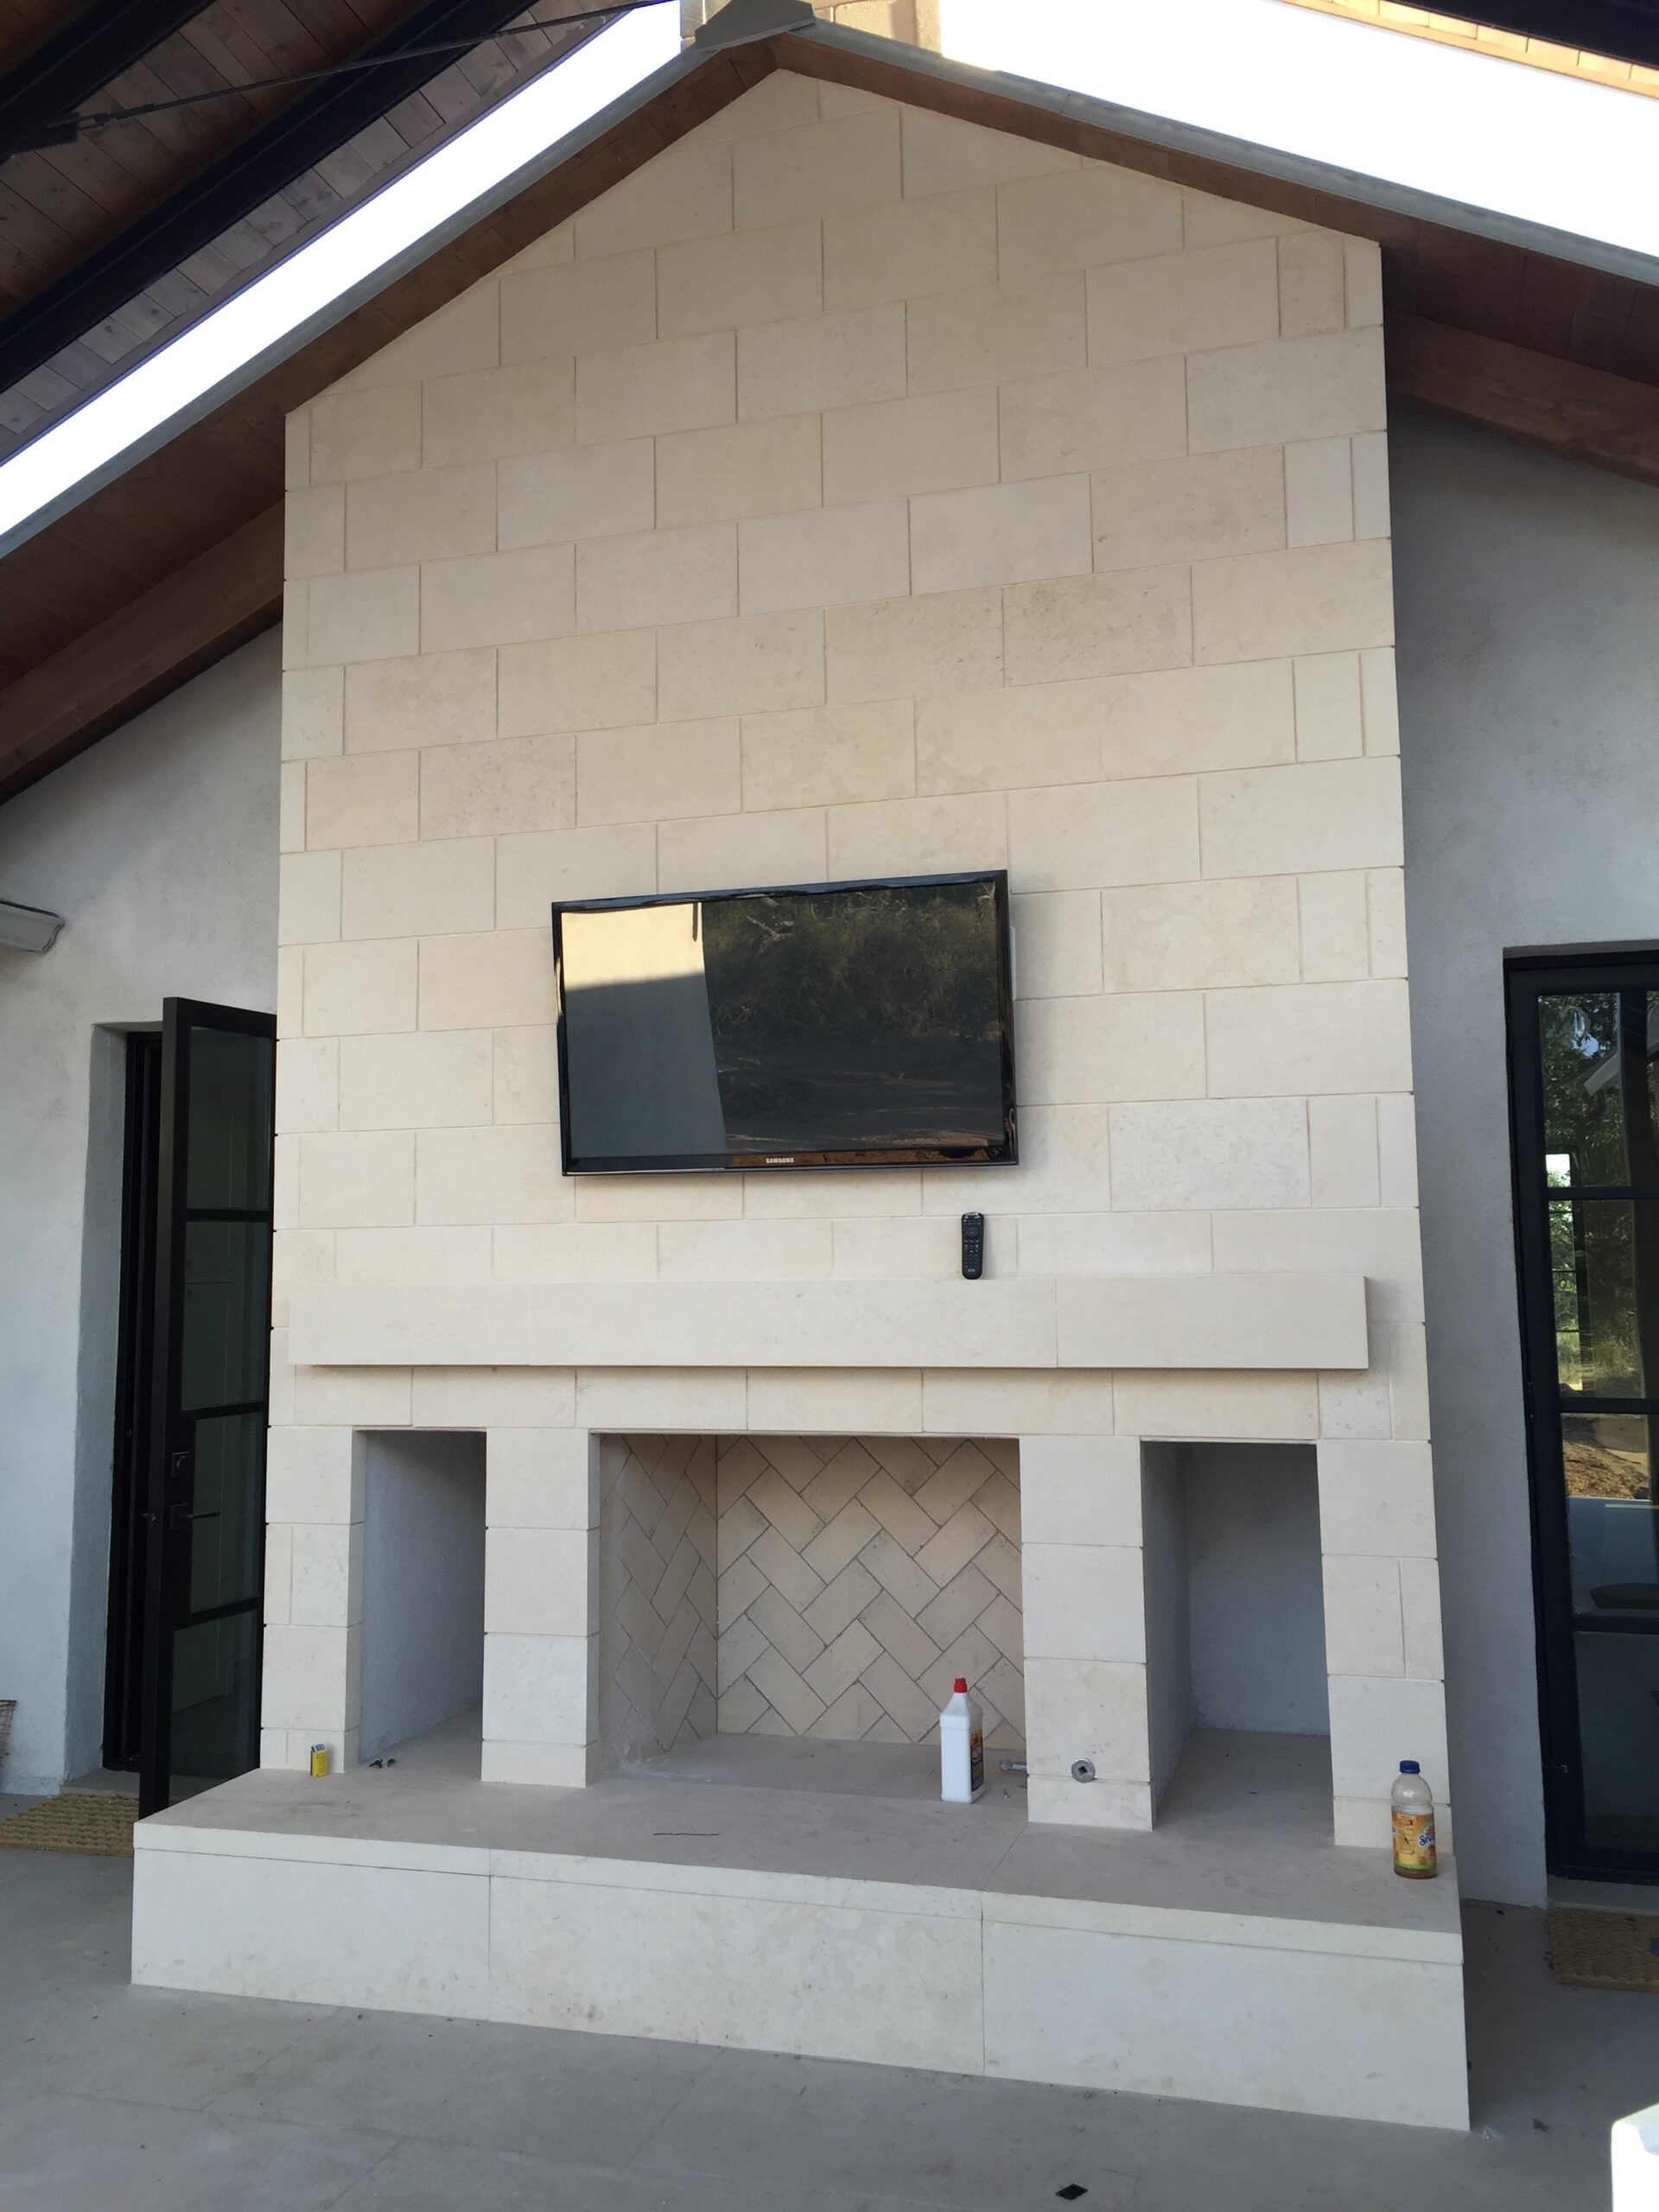 Outdoor TV installed above fireplace